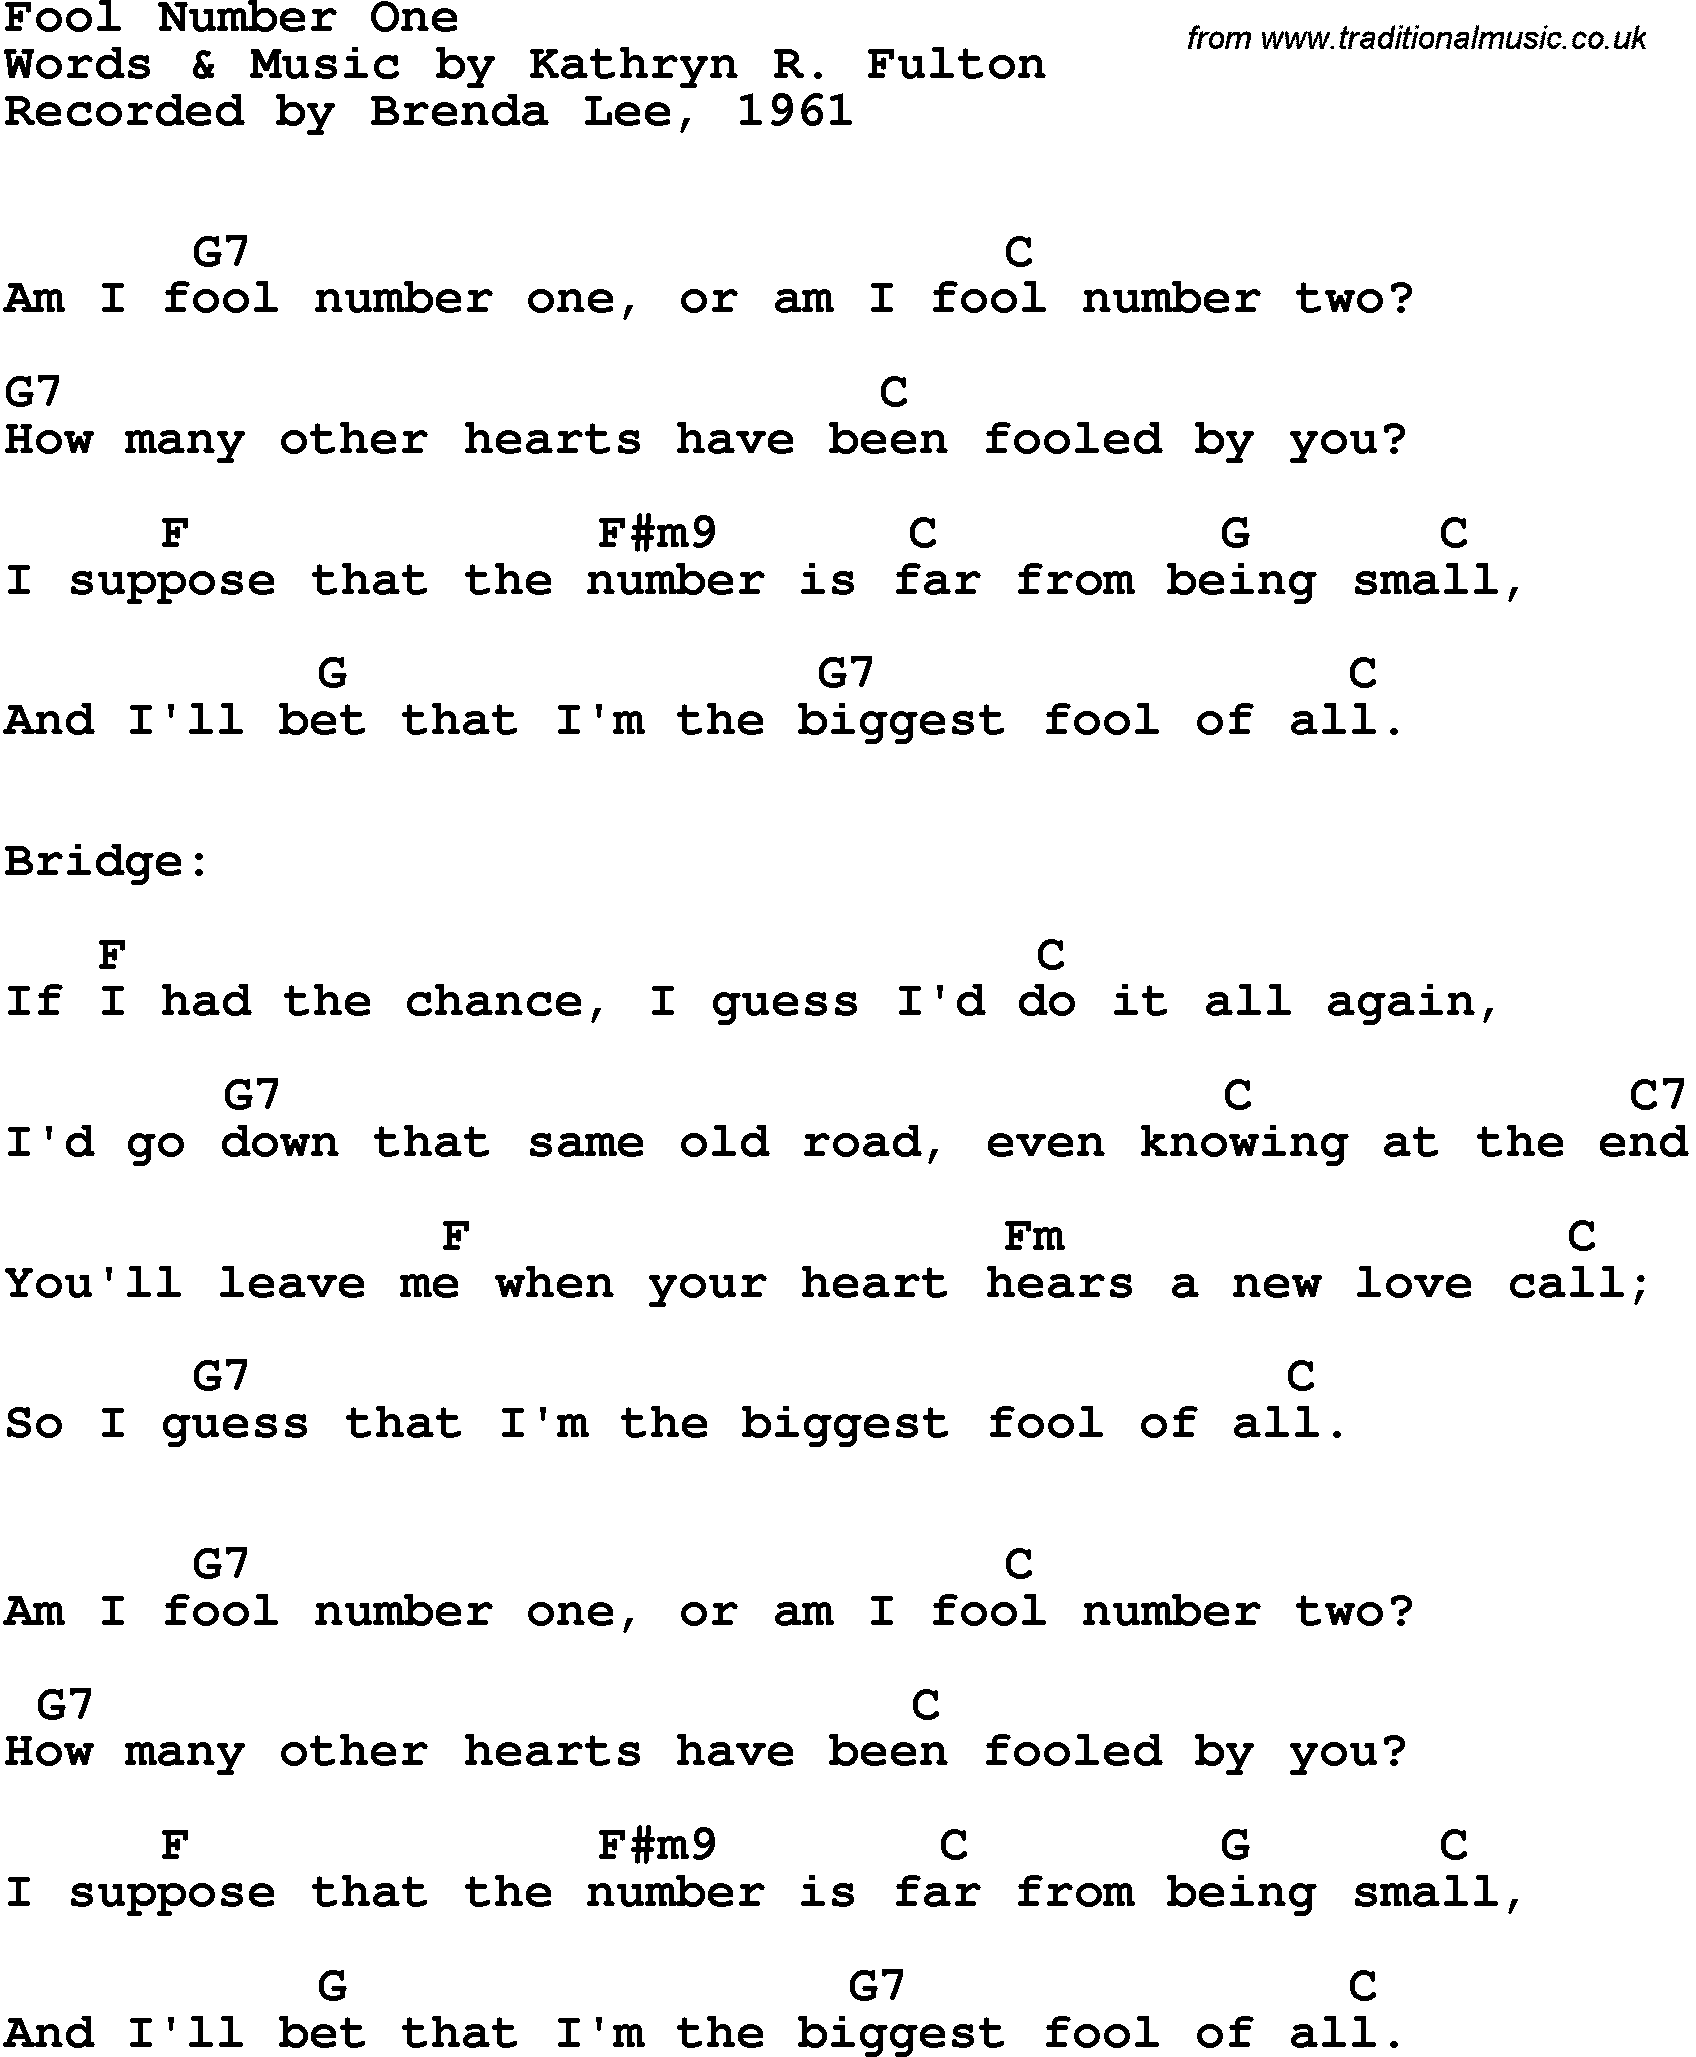 Song Lyrics with guitar chords for Fool Number One - Brenda Lee, 1961